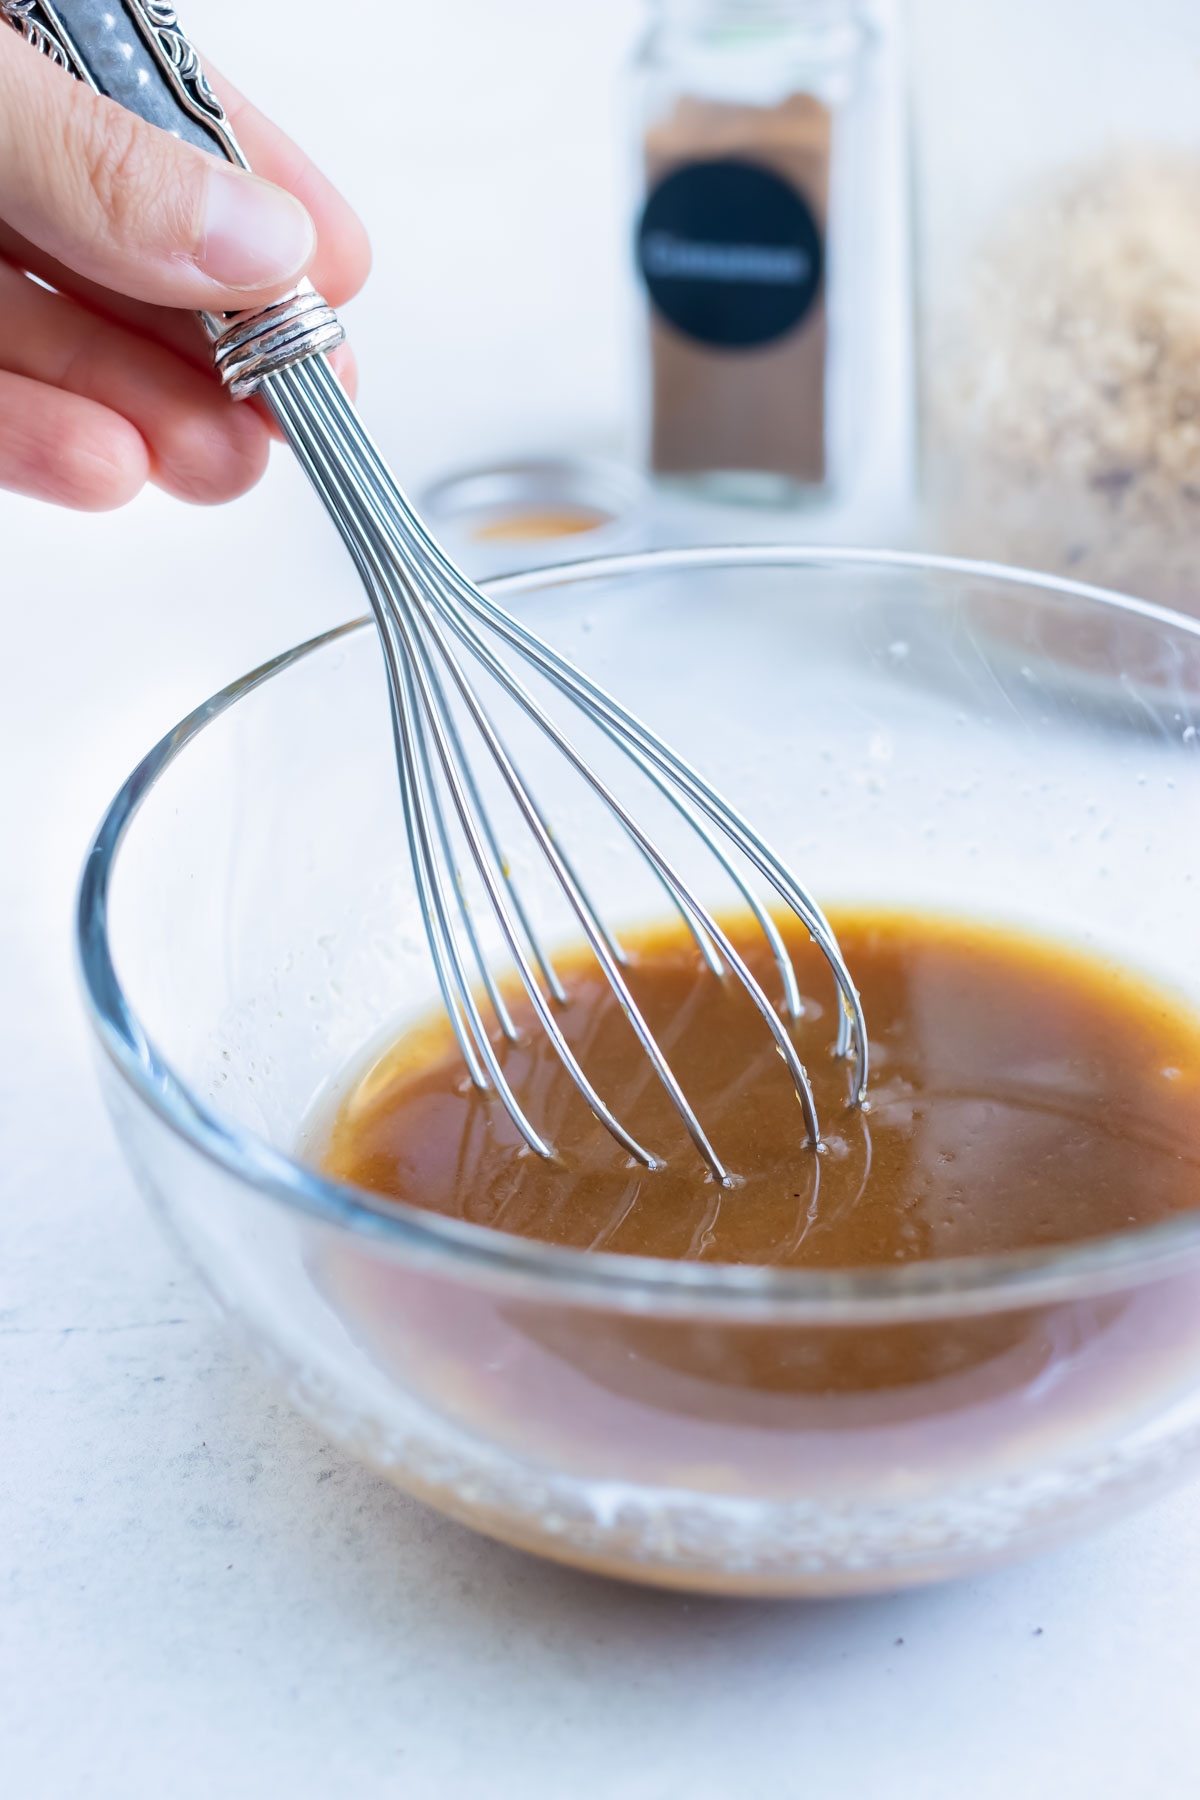 Melted butter, brown sugar, cinnamon, and oil are mixed together in a bowl.